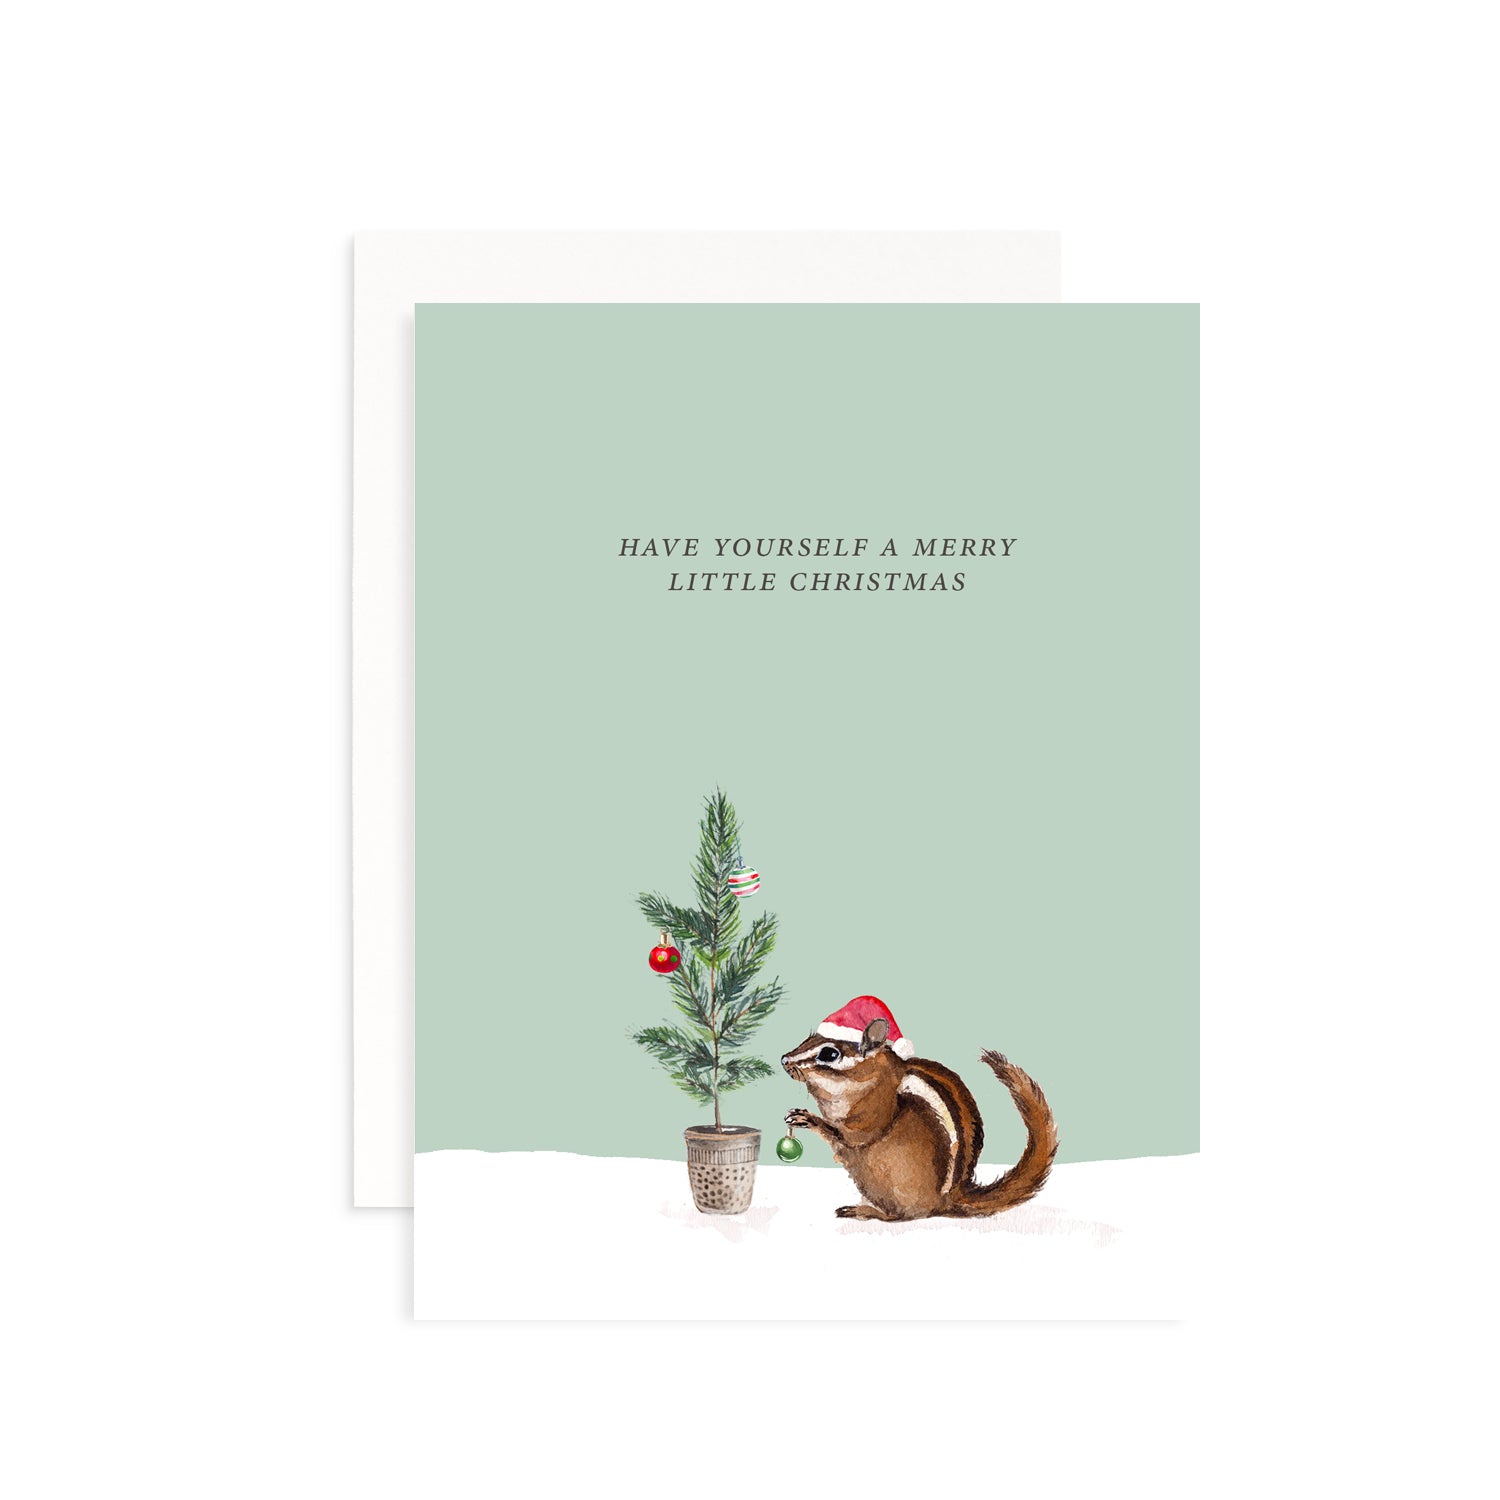 Merry Little Christmas Greeting Card Greeting Card